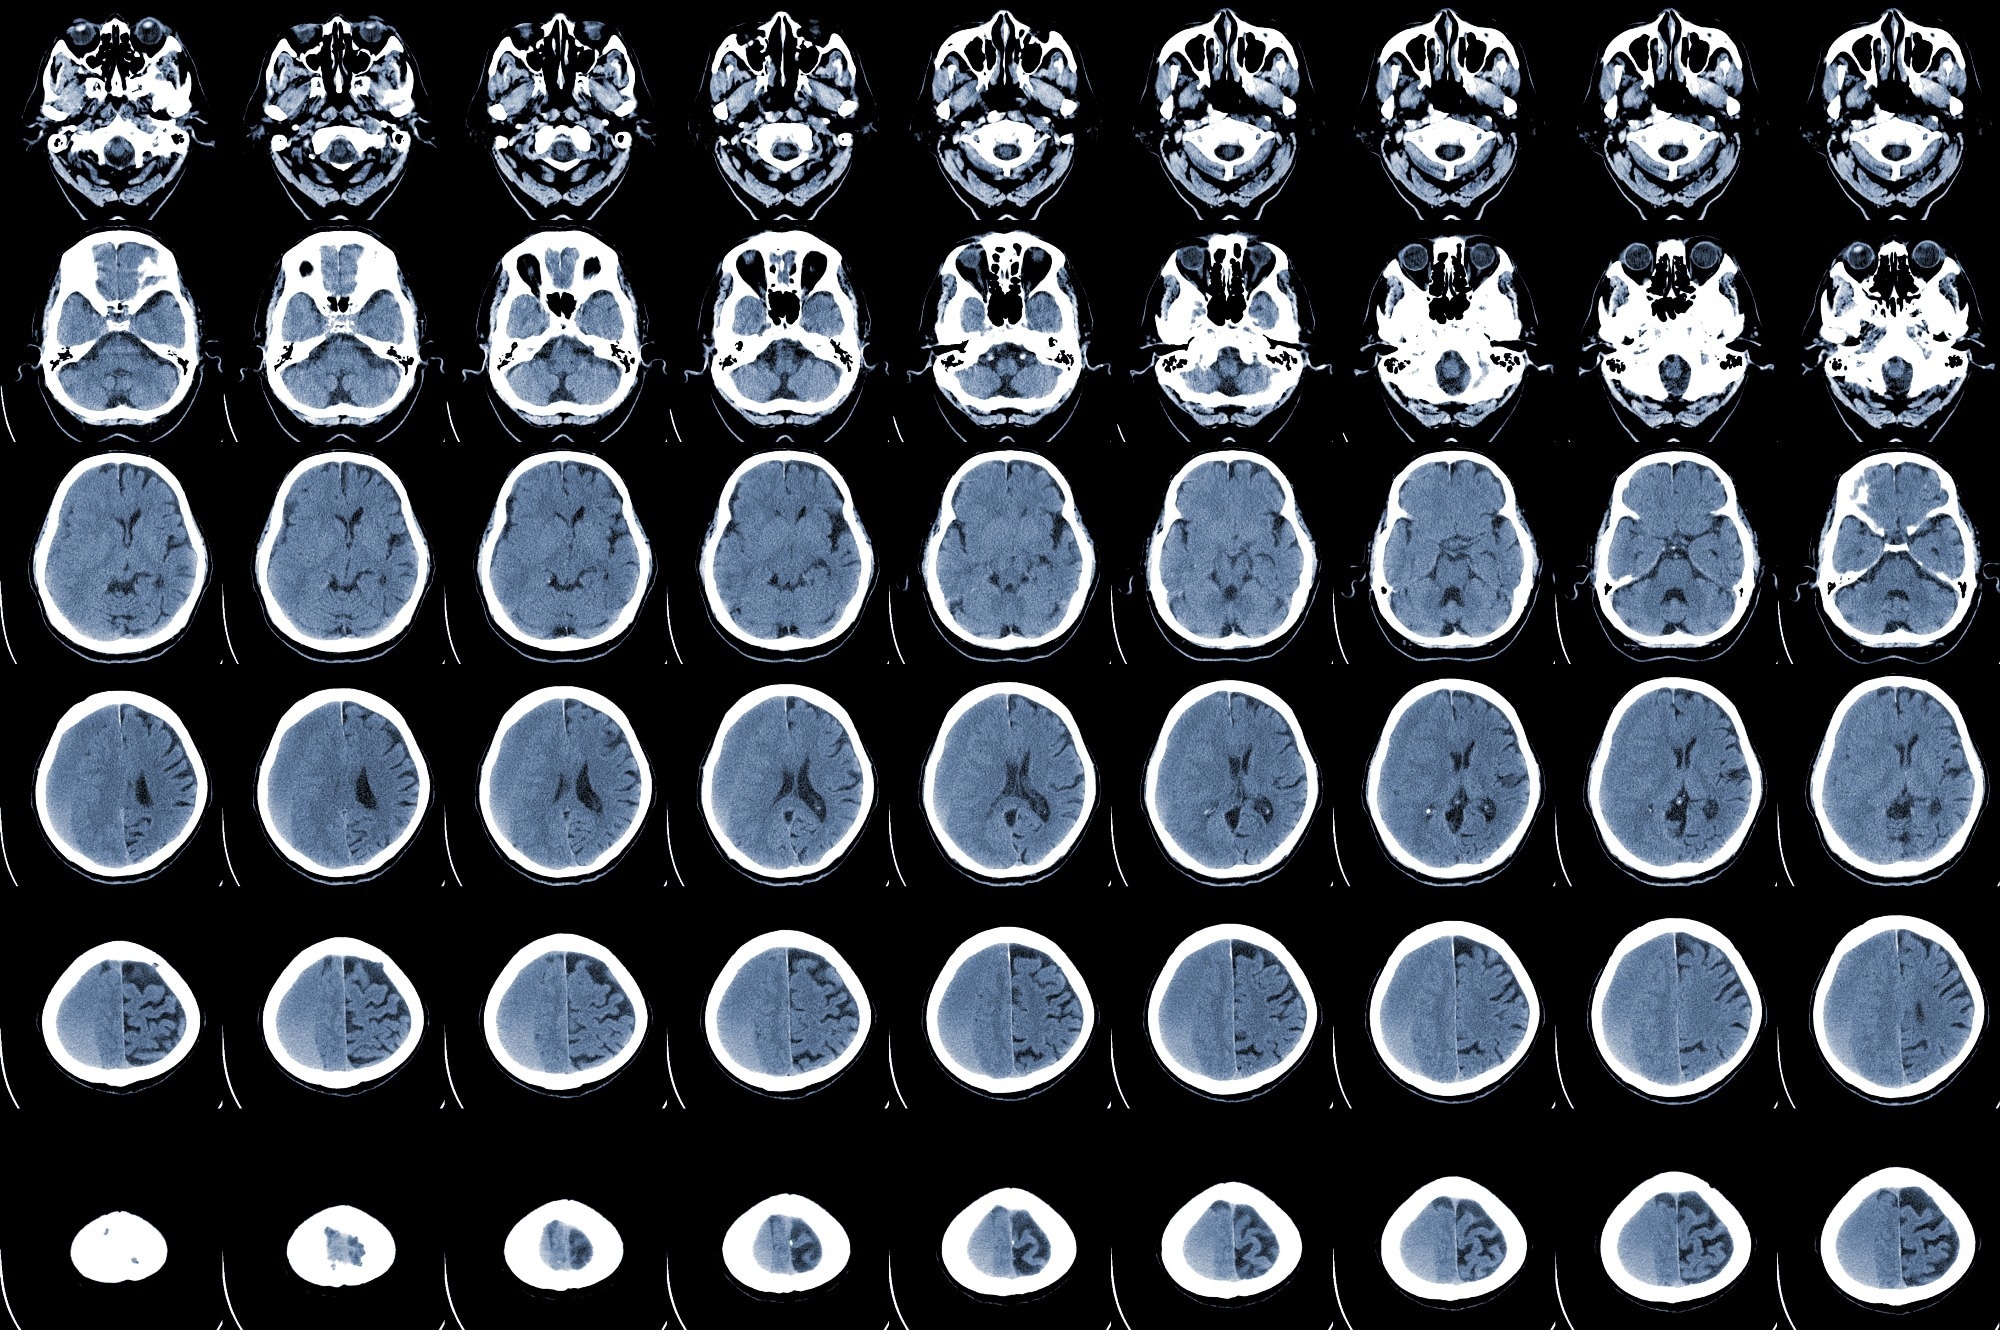 Study: The impact of SARS-CoV-2 infection on the outcome of acute ischemic stroke—A retrospective cohort study. Image Credit: April stock / Shutterstock